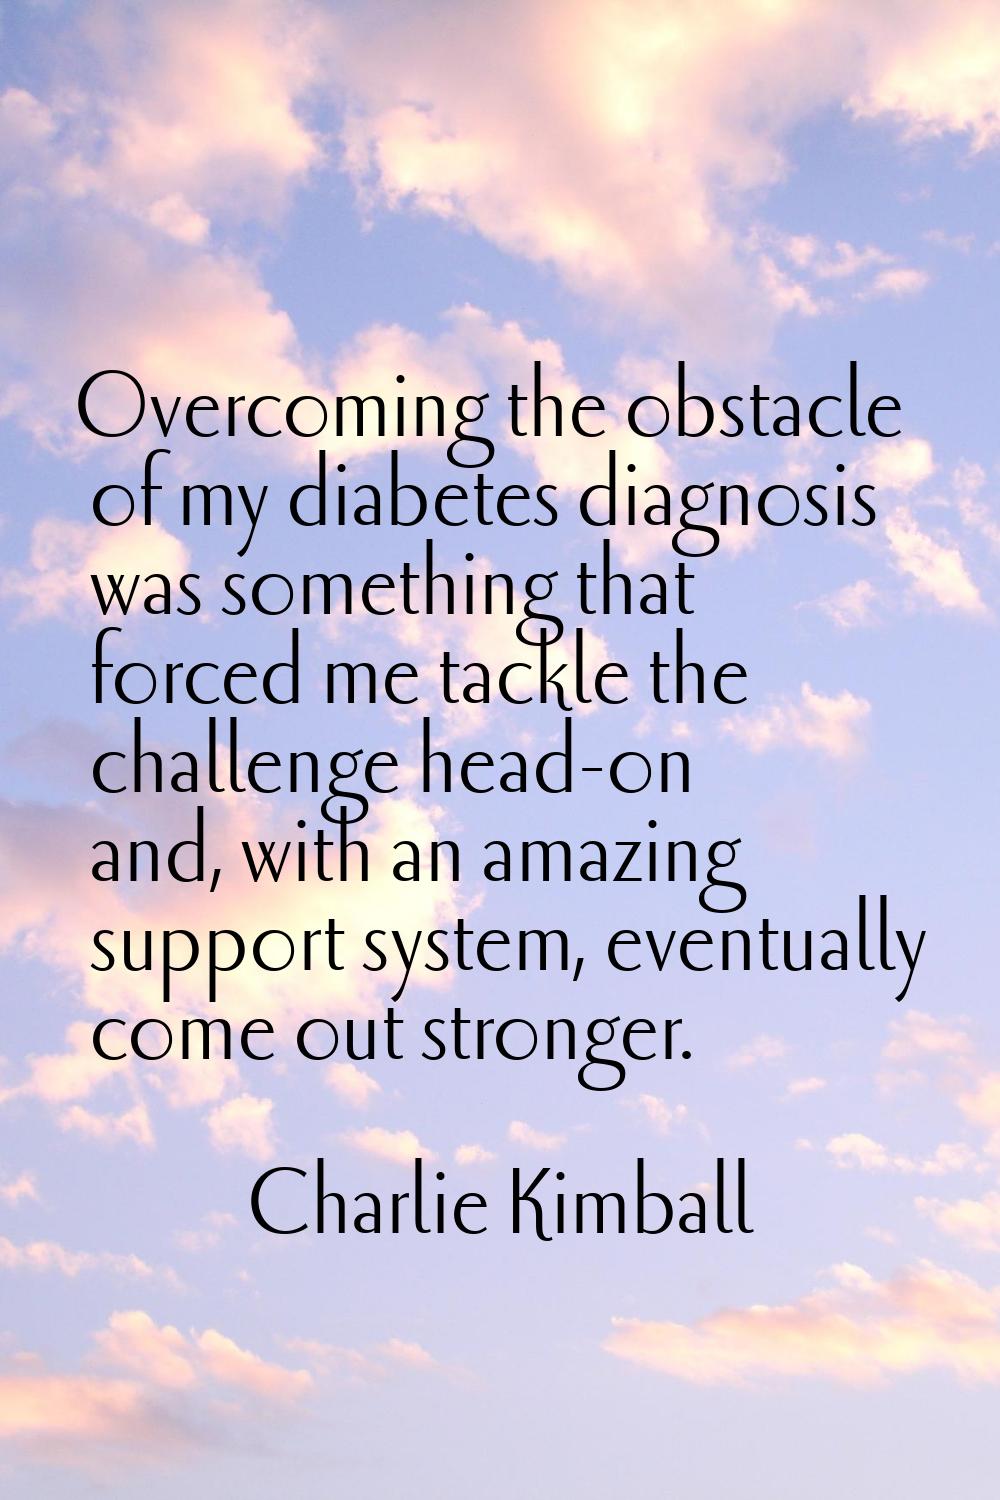 Overcoming the obstacle of my diabetes diagnosis was something that forced me tackle the challenge 